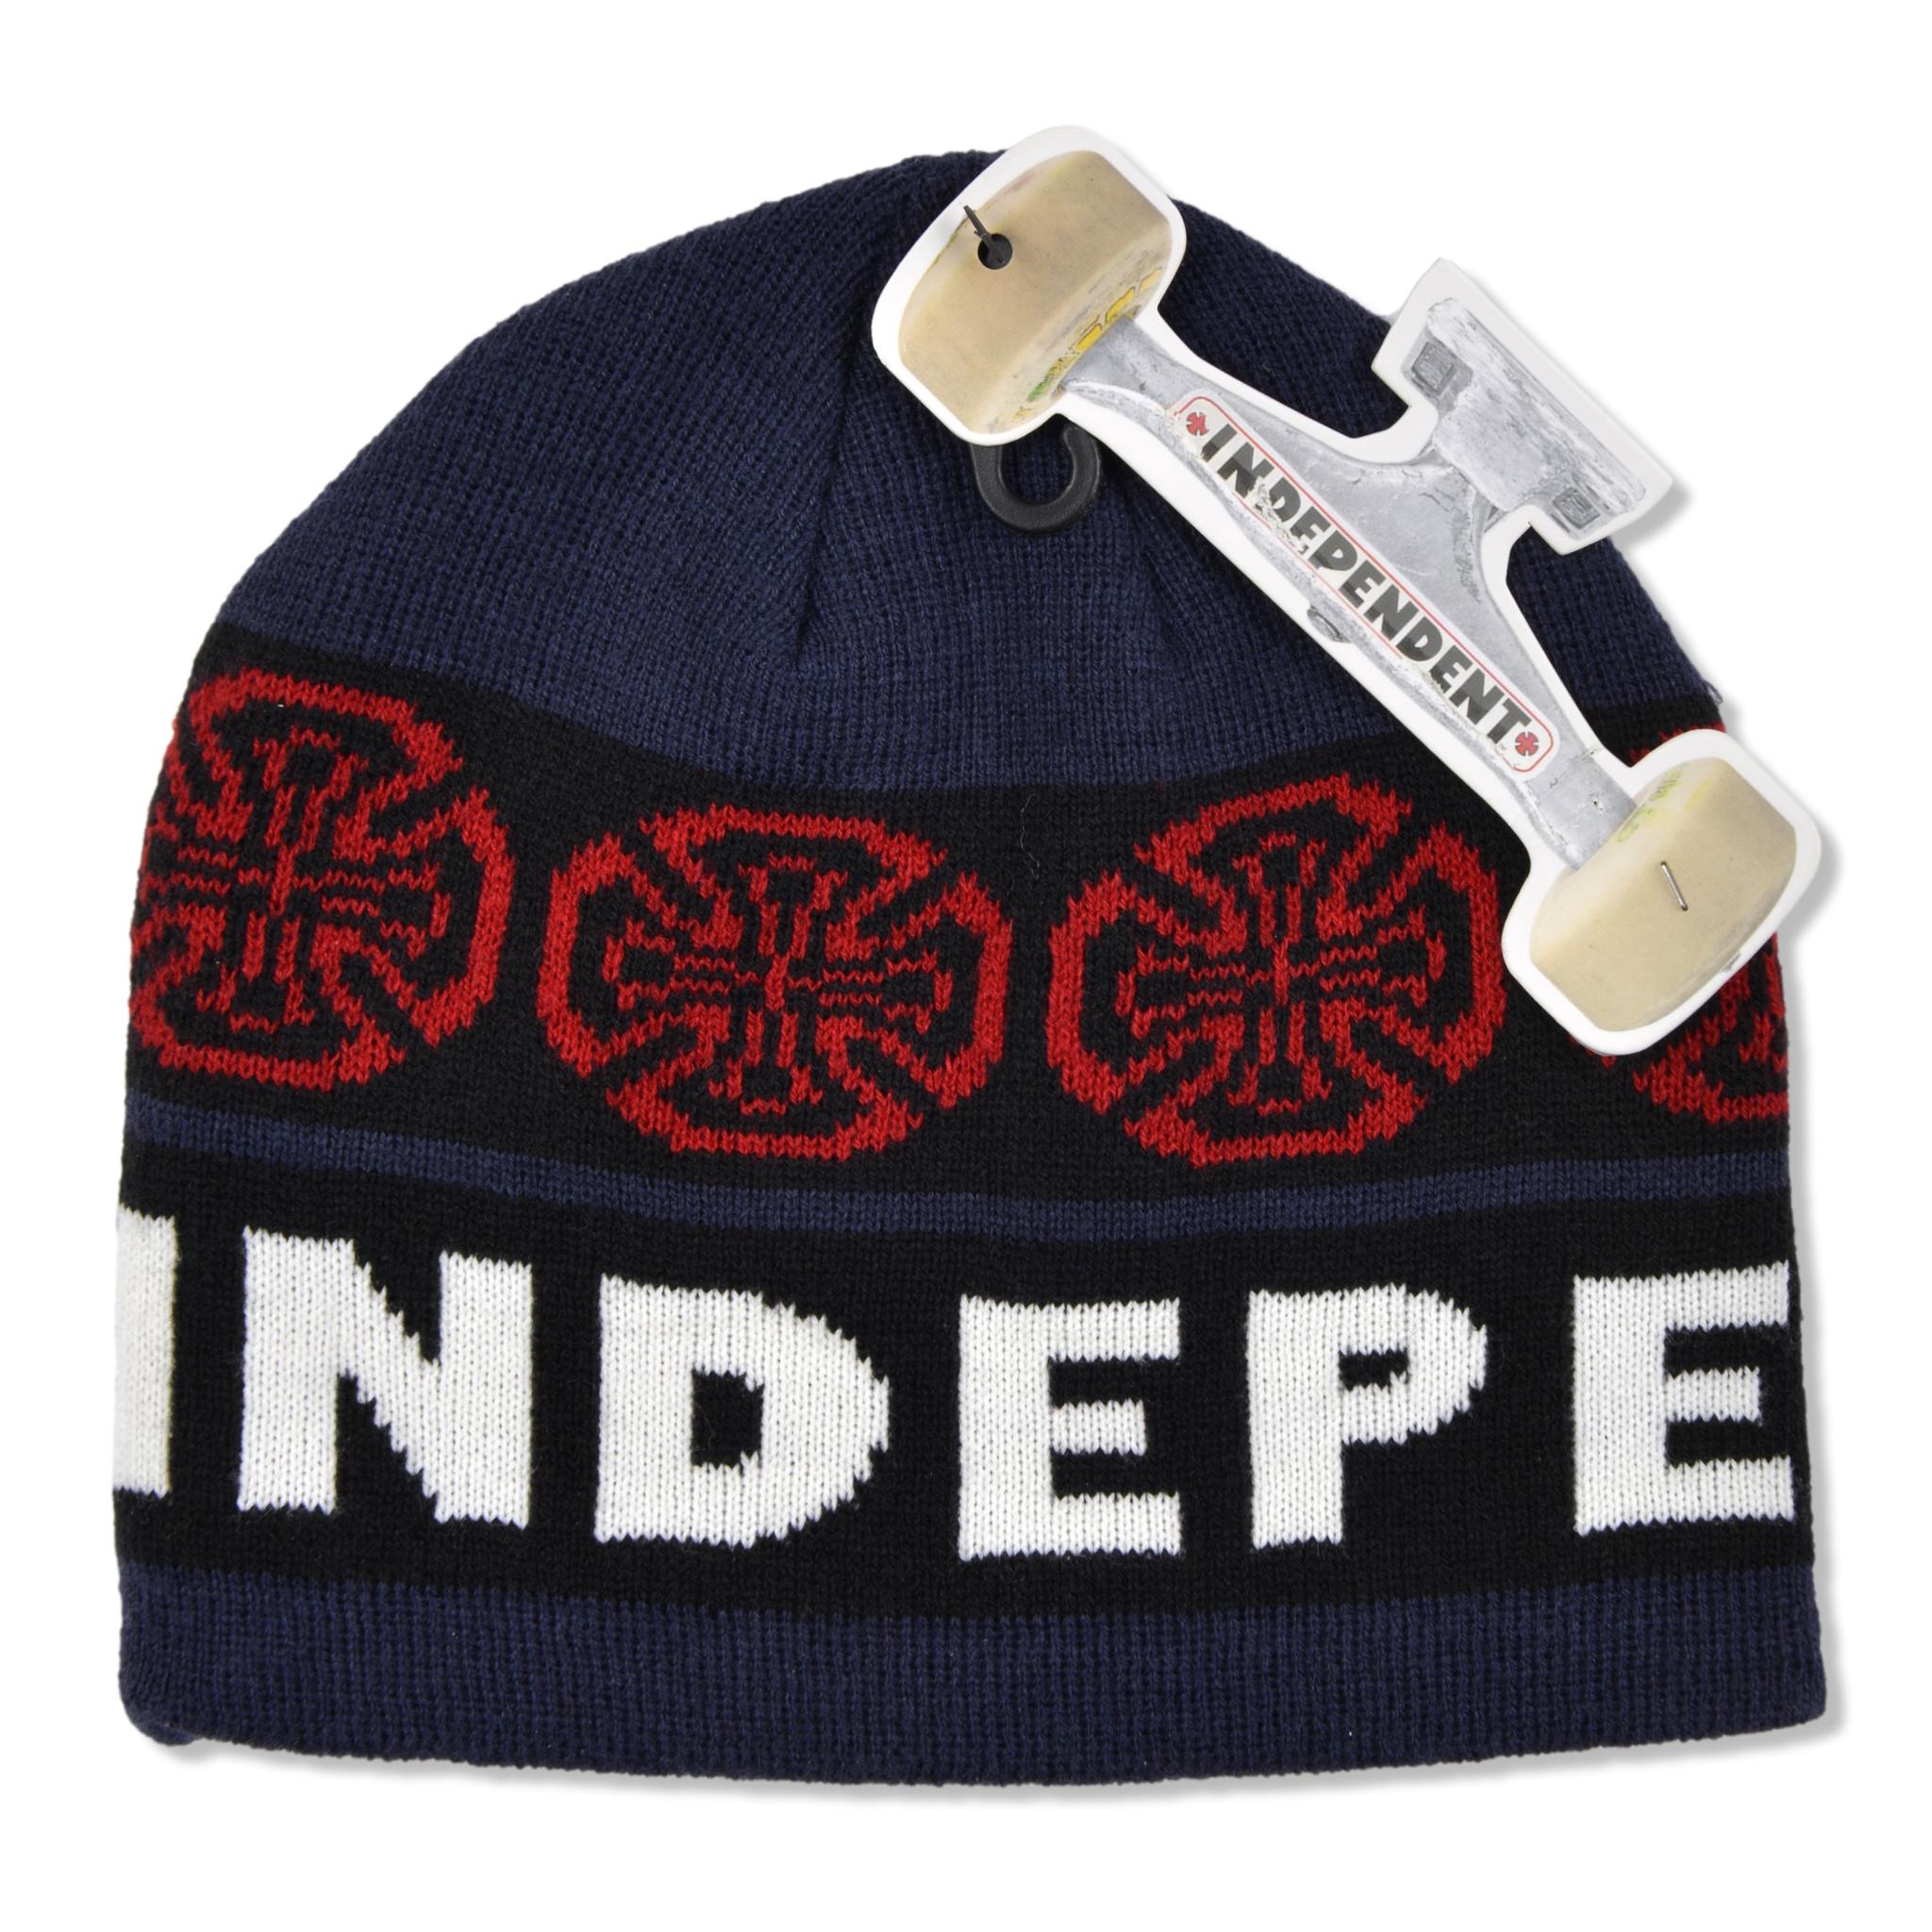 INDEPENDENT BLUE WOVEN CROSSES BEANIE